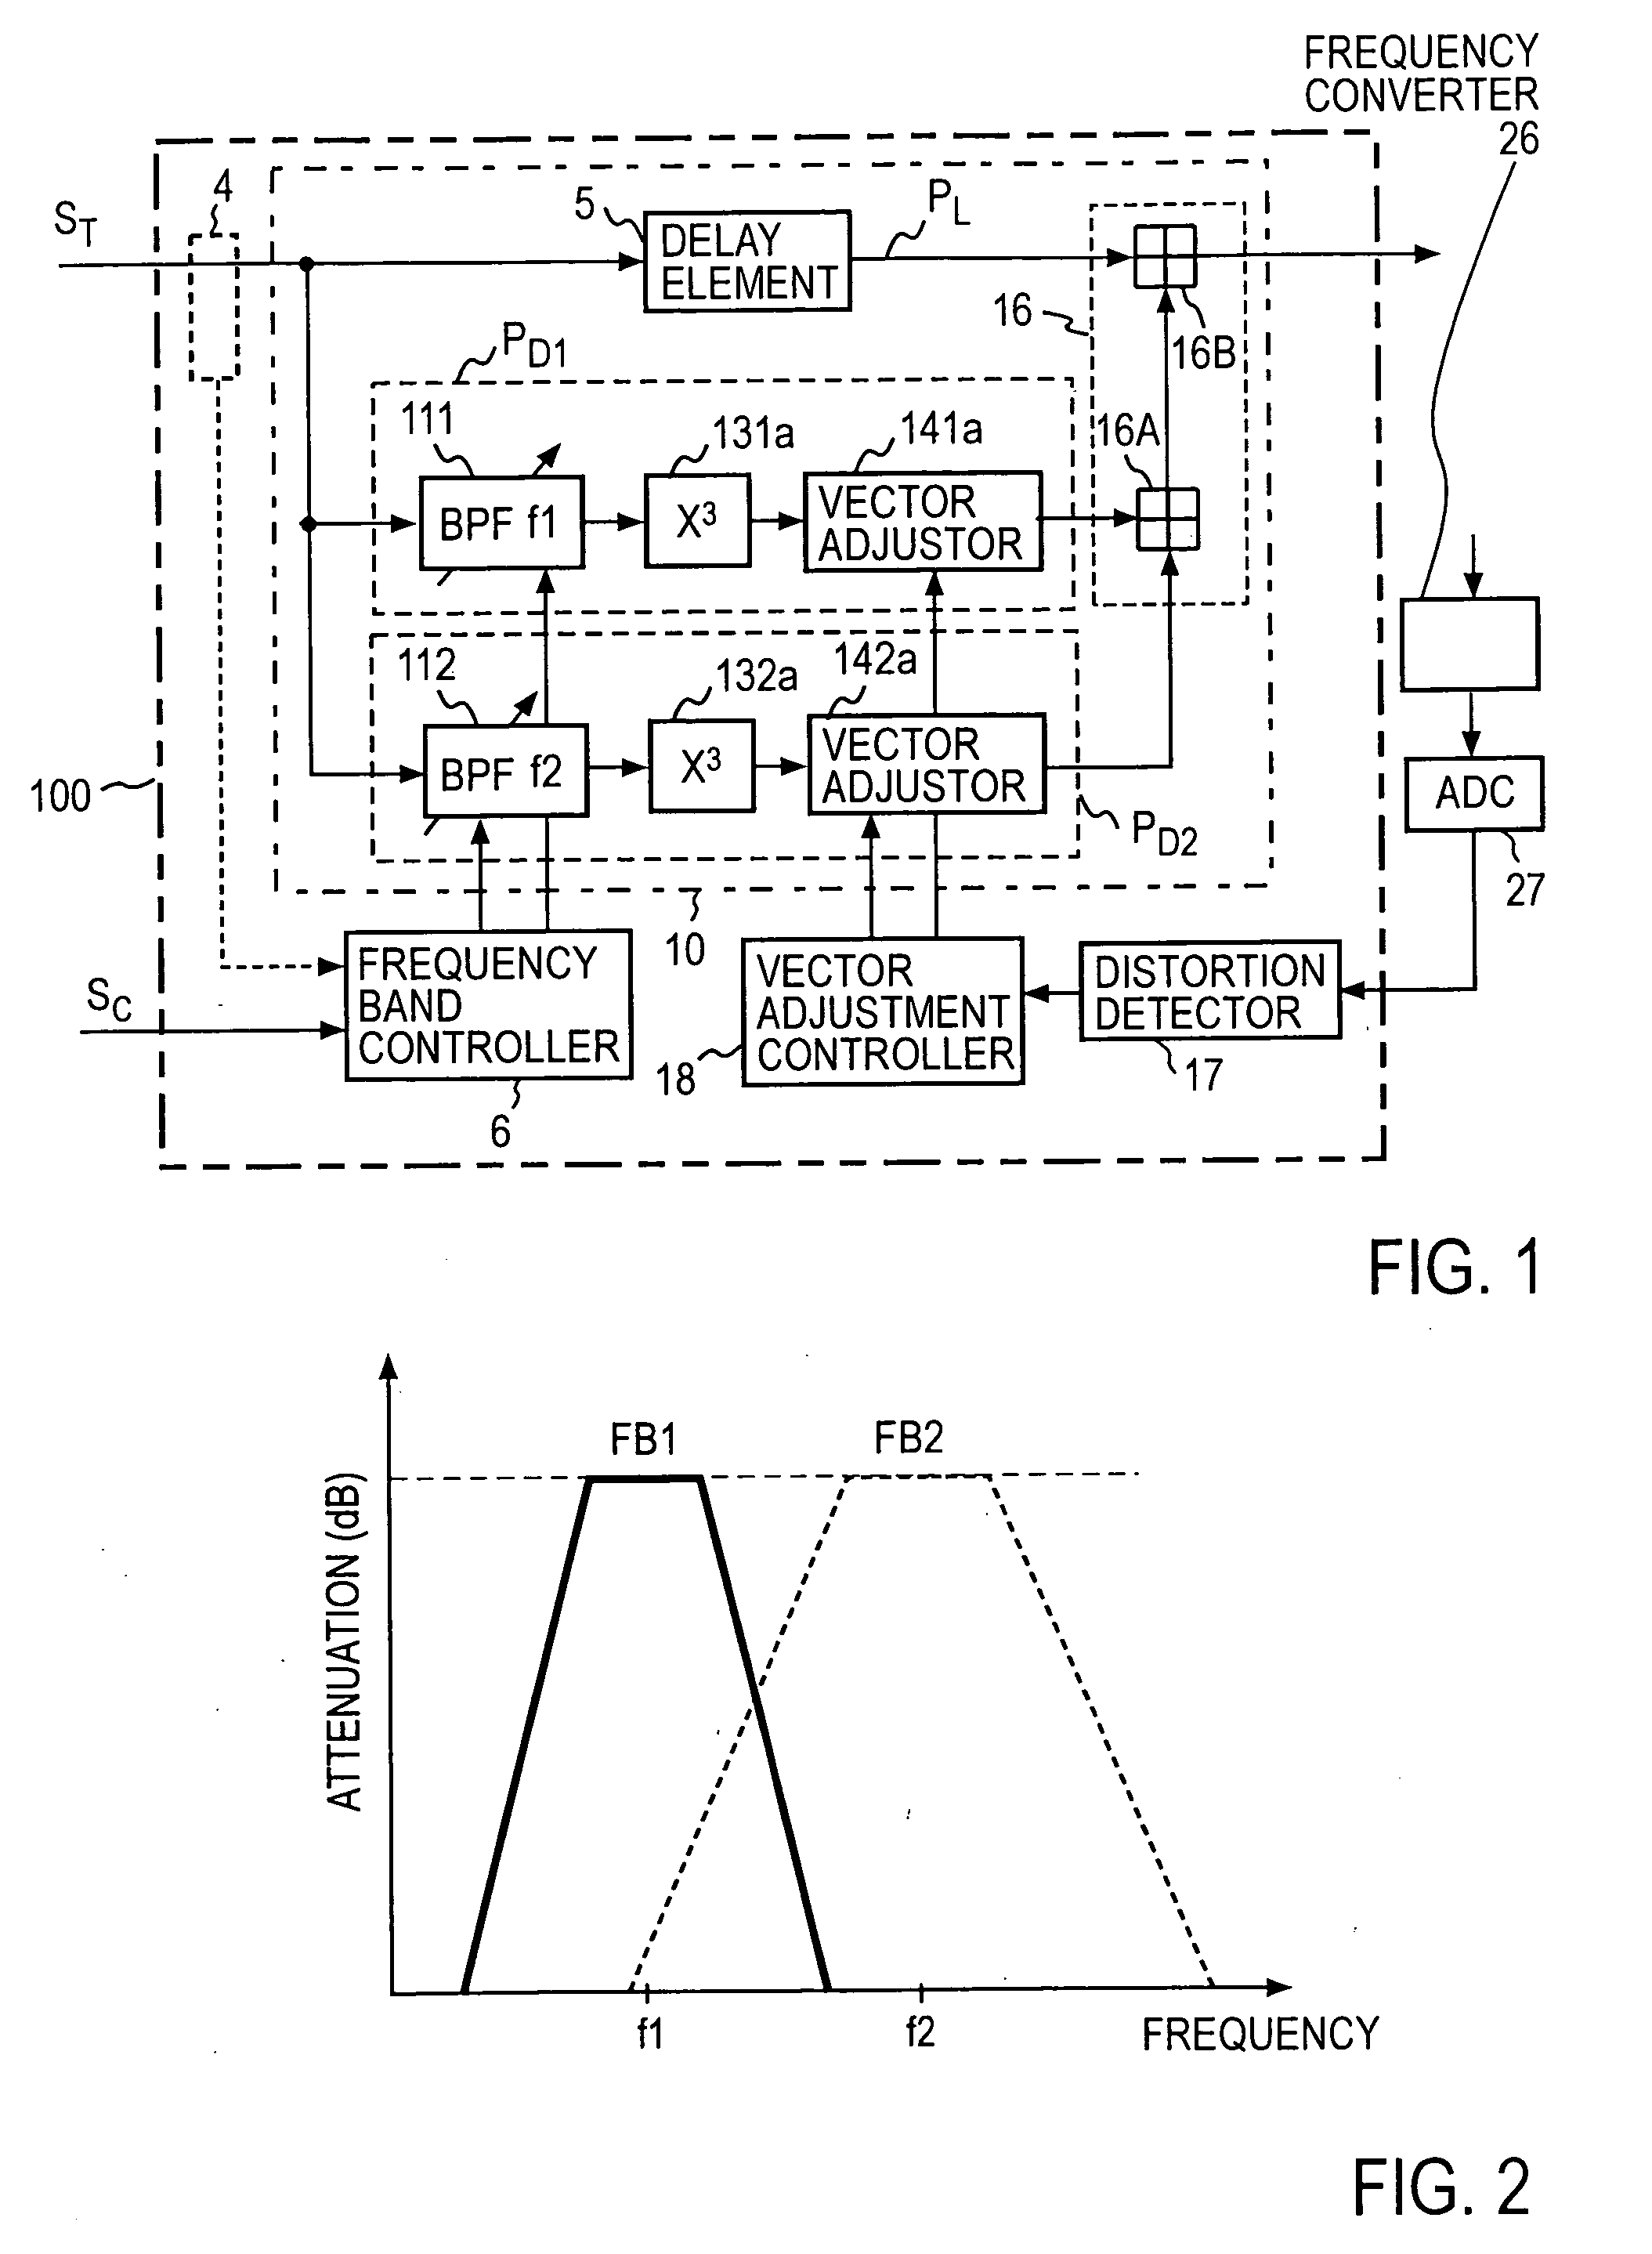 Power series type predistorter for multi-frequency bands operation